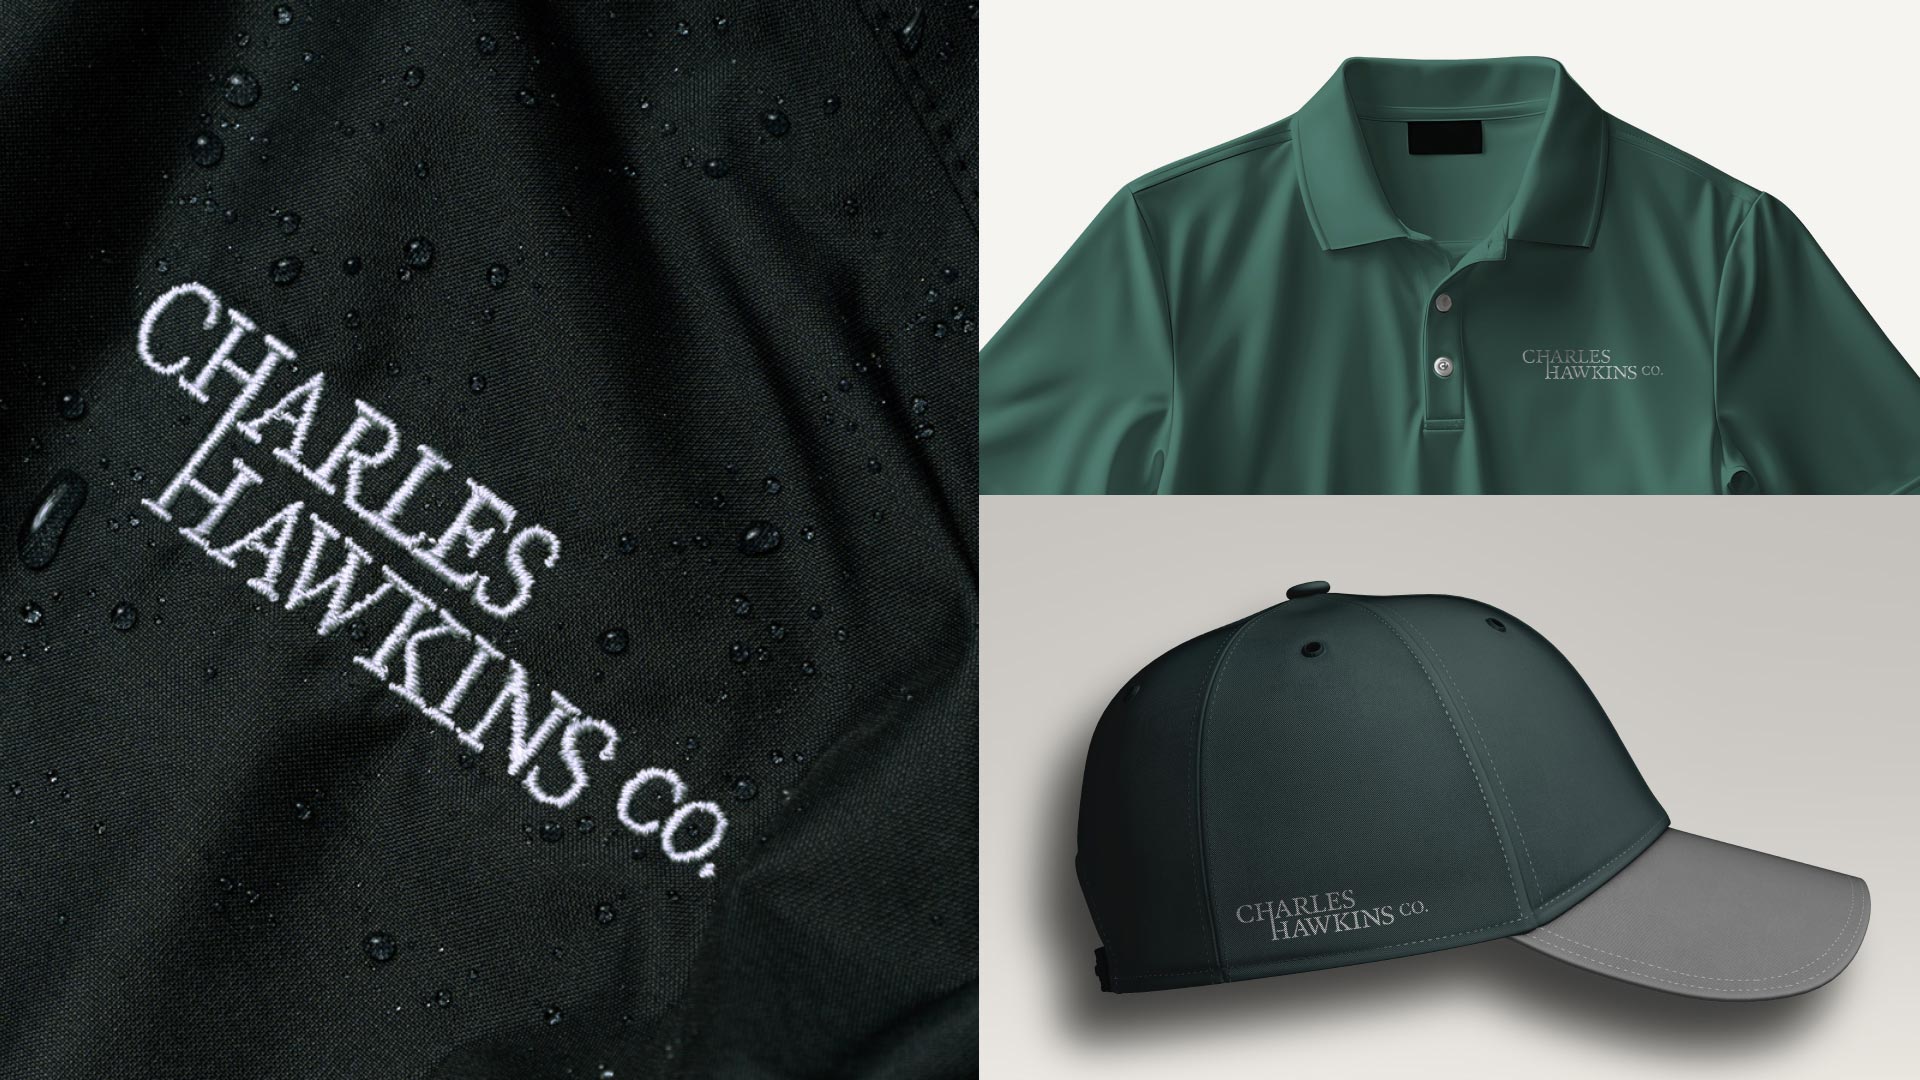 Images of a polo shirt and hat branded with the Charles Hawkins logo